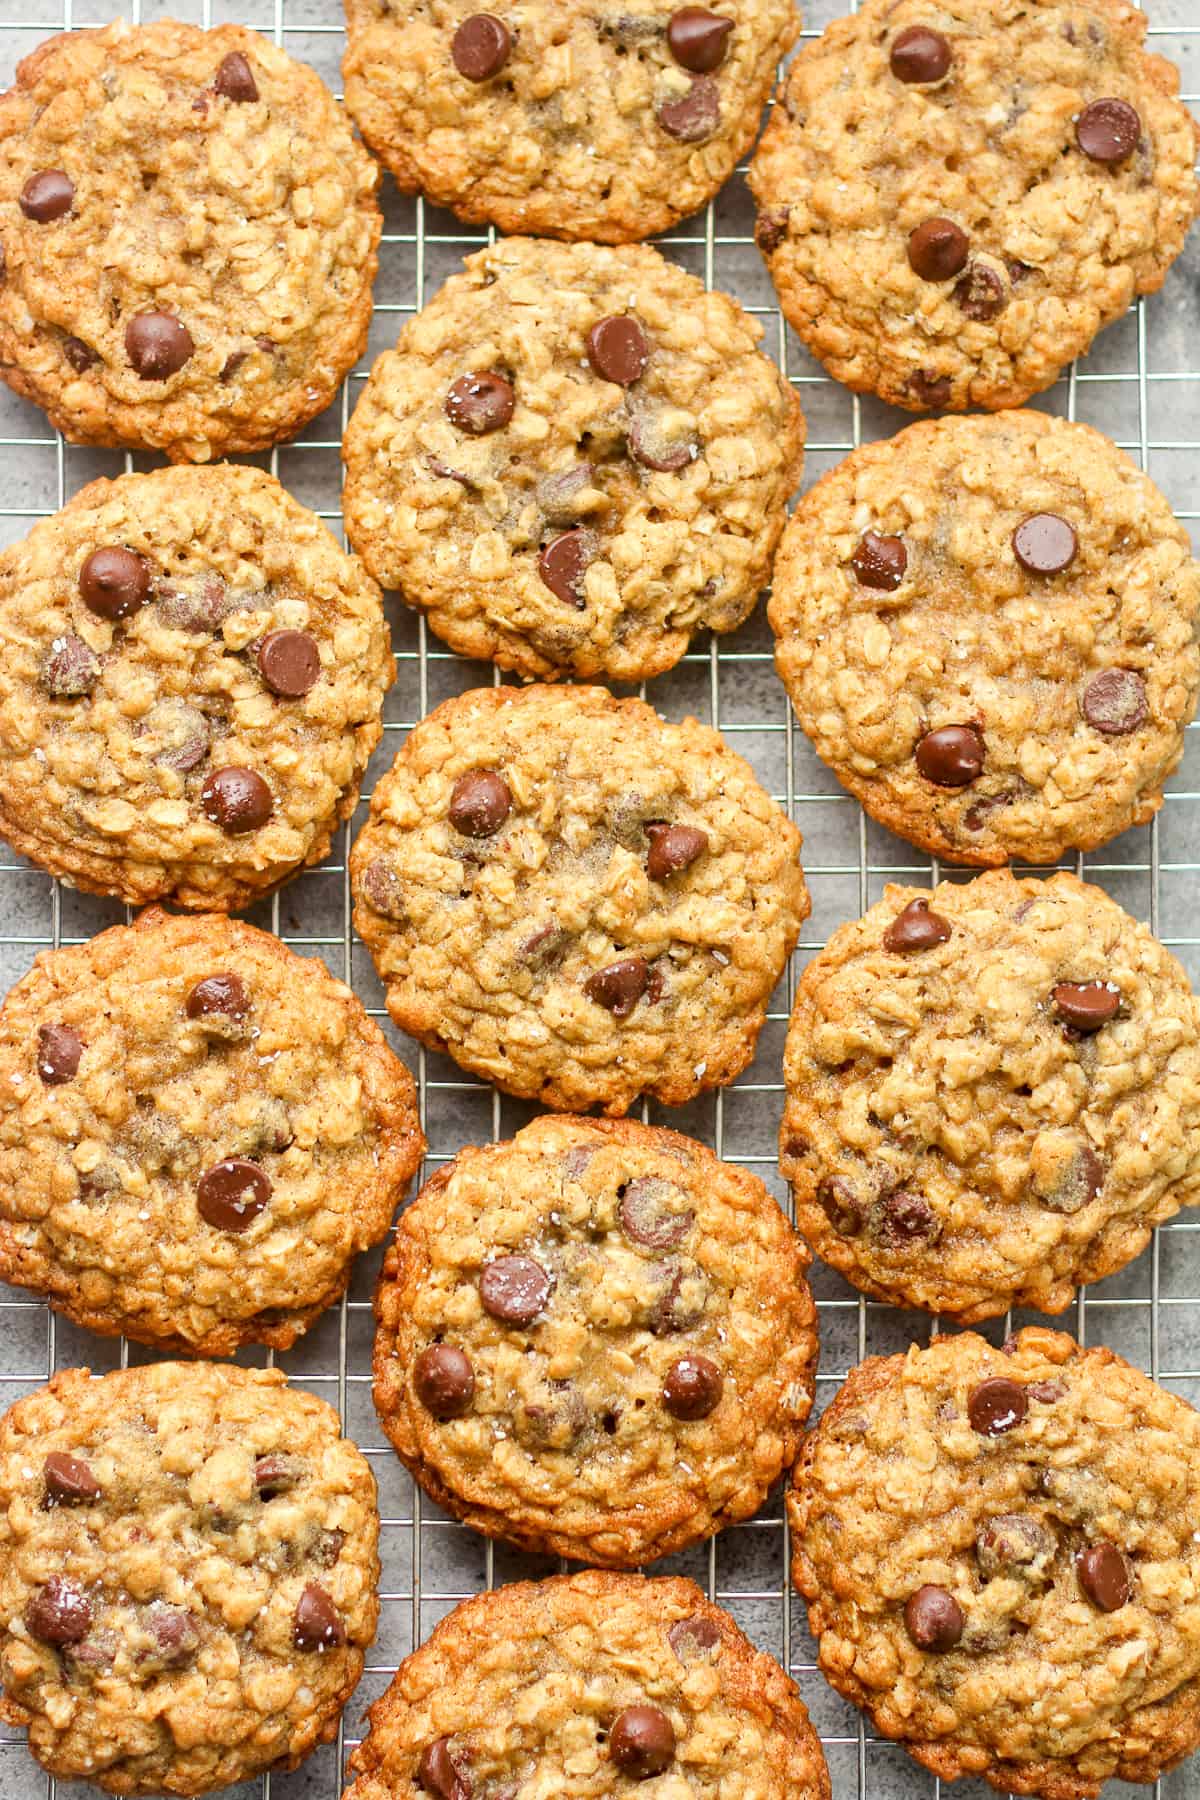 A rack of chocolate chip oatmeal cookies.